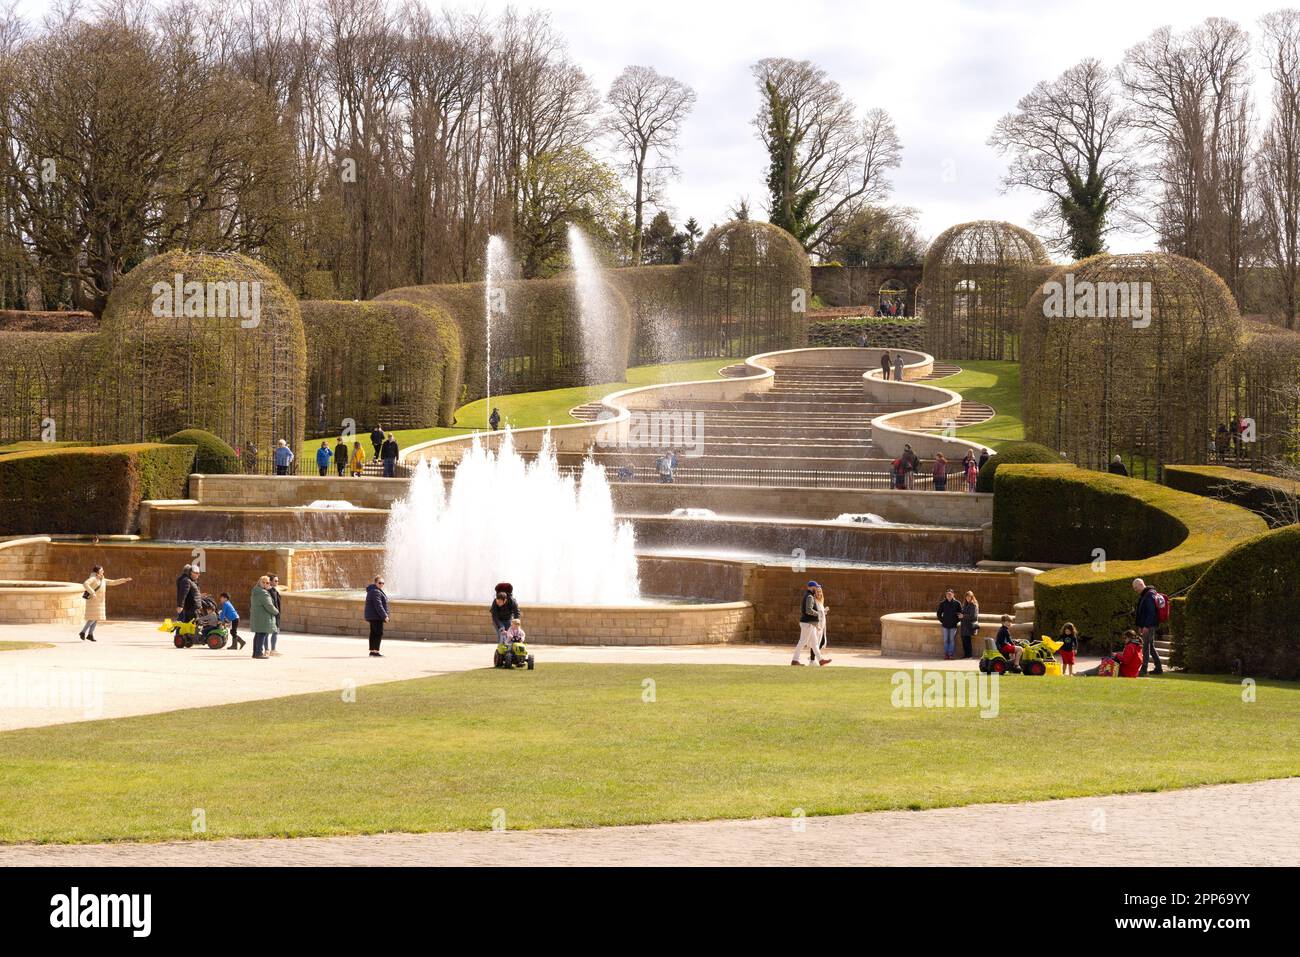 The Cascade of fountains, a fountain complex, The Alnwick Garden, Alnwick, Northumberland UK Stock Photo